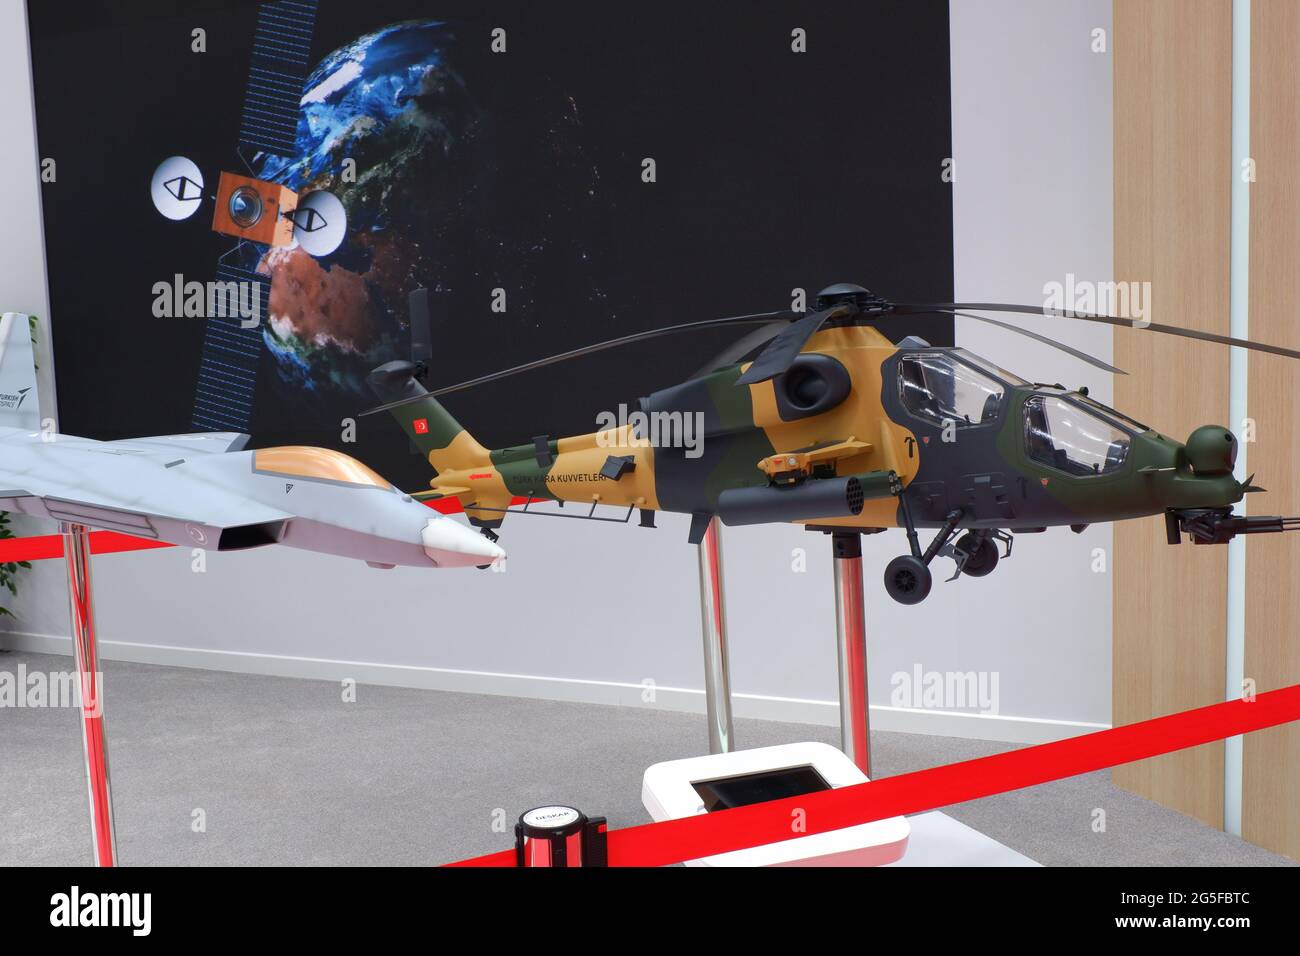 Models of Turkish designed aircraft and attack helicopter at industrial fair indoor Stock Photo